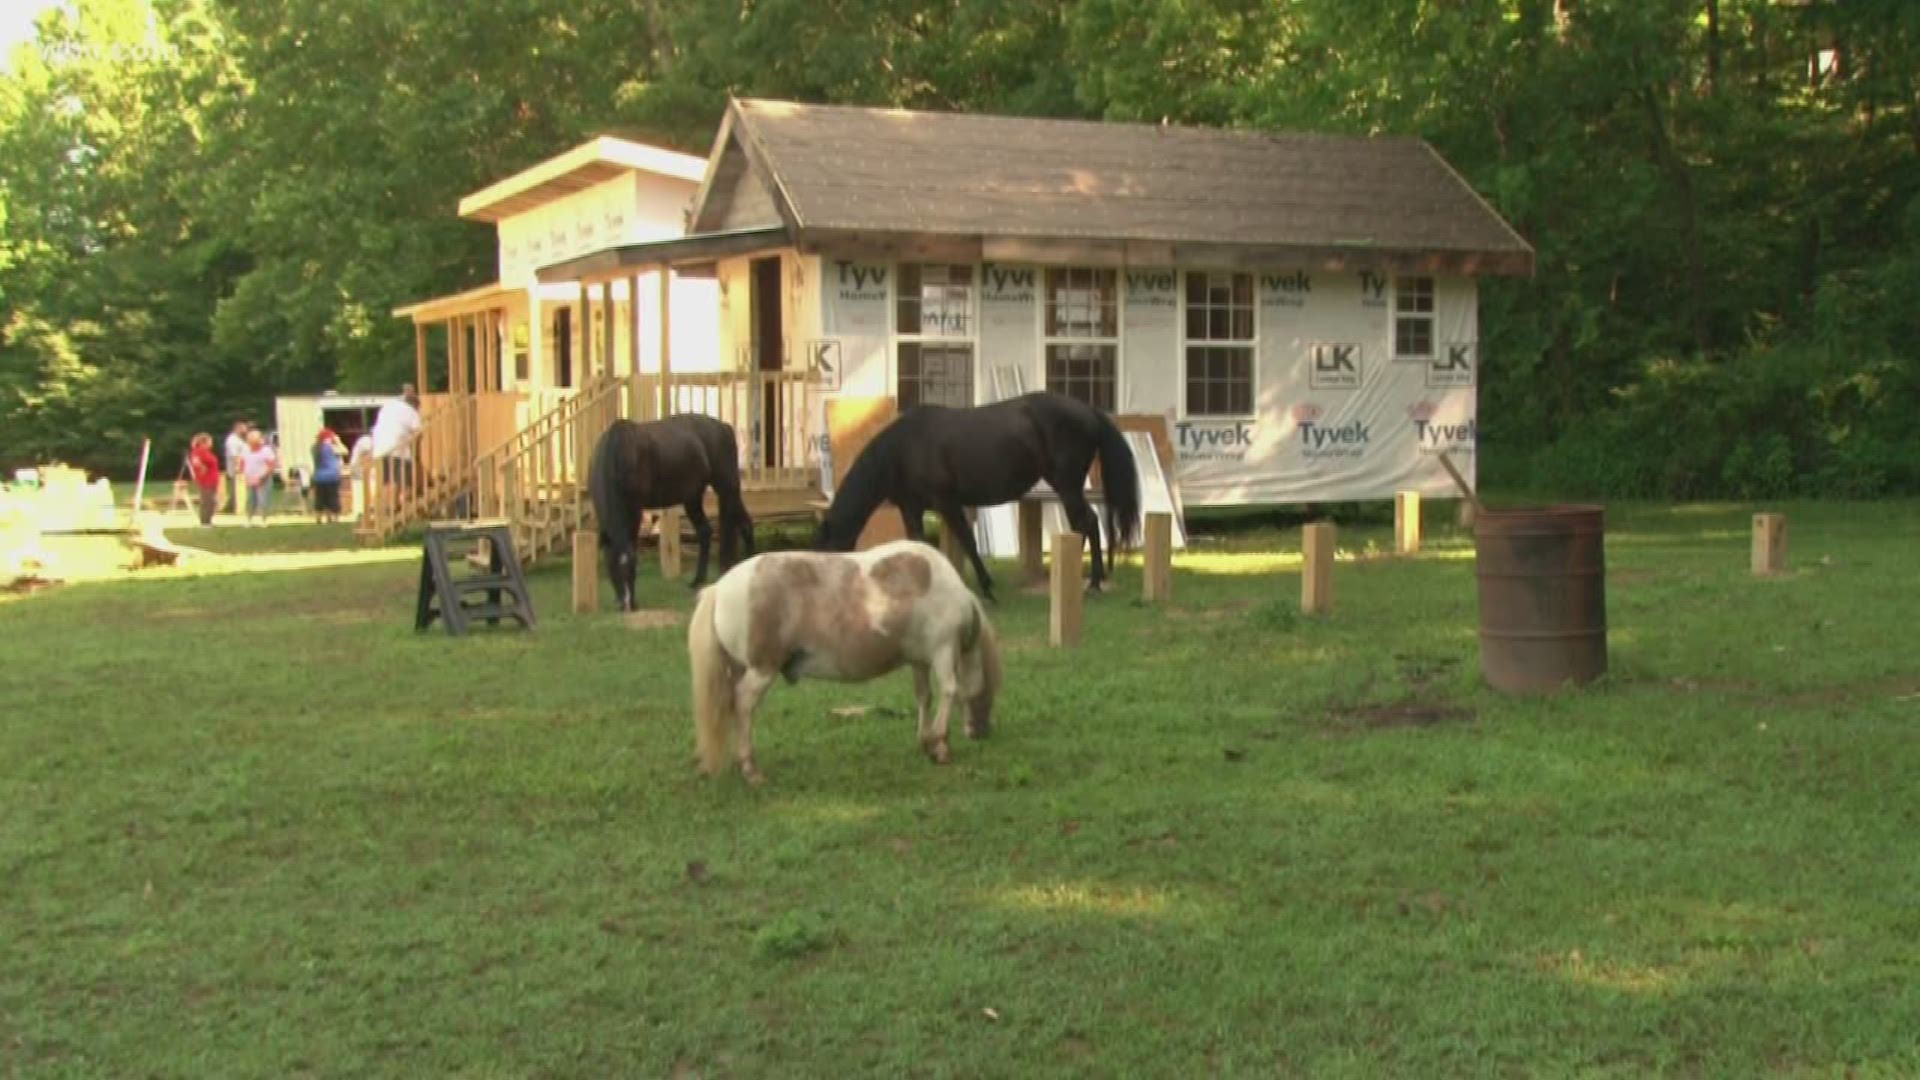 The homes are being built to help recovering addicts get back on their feet.